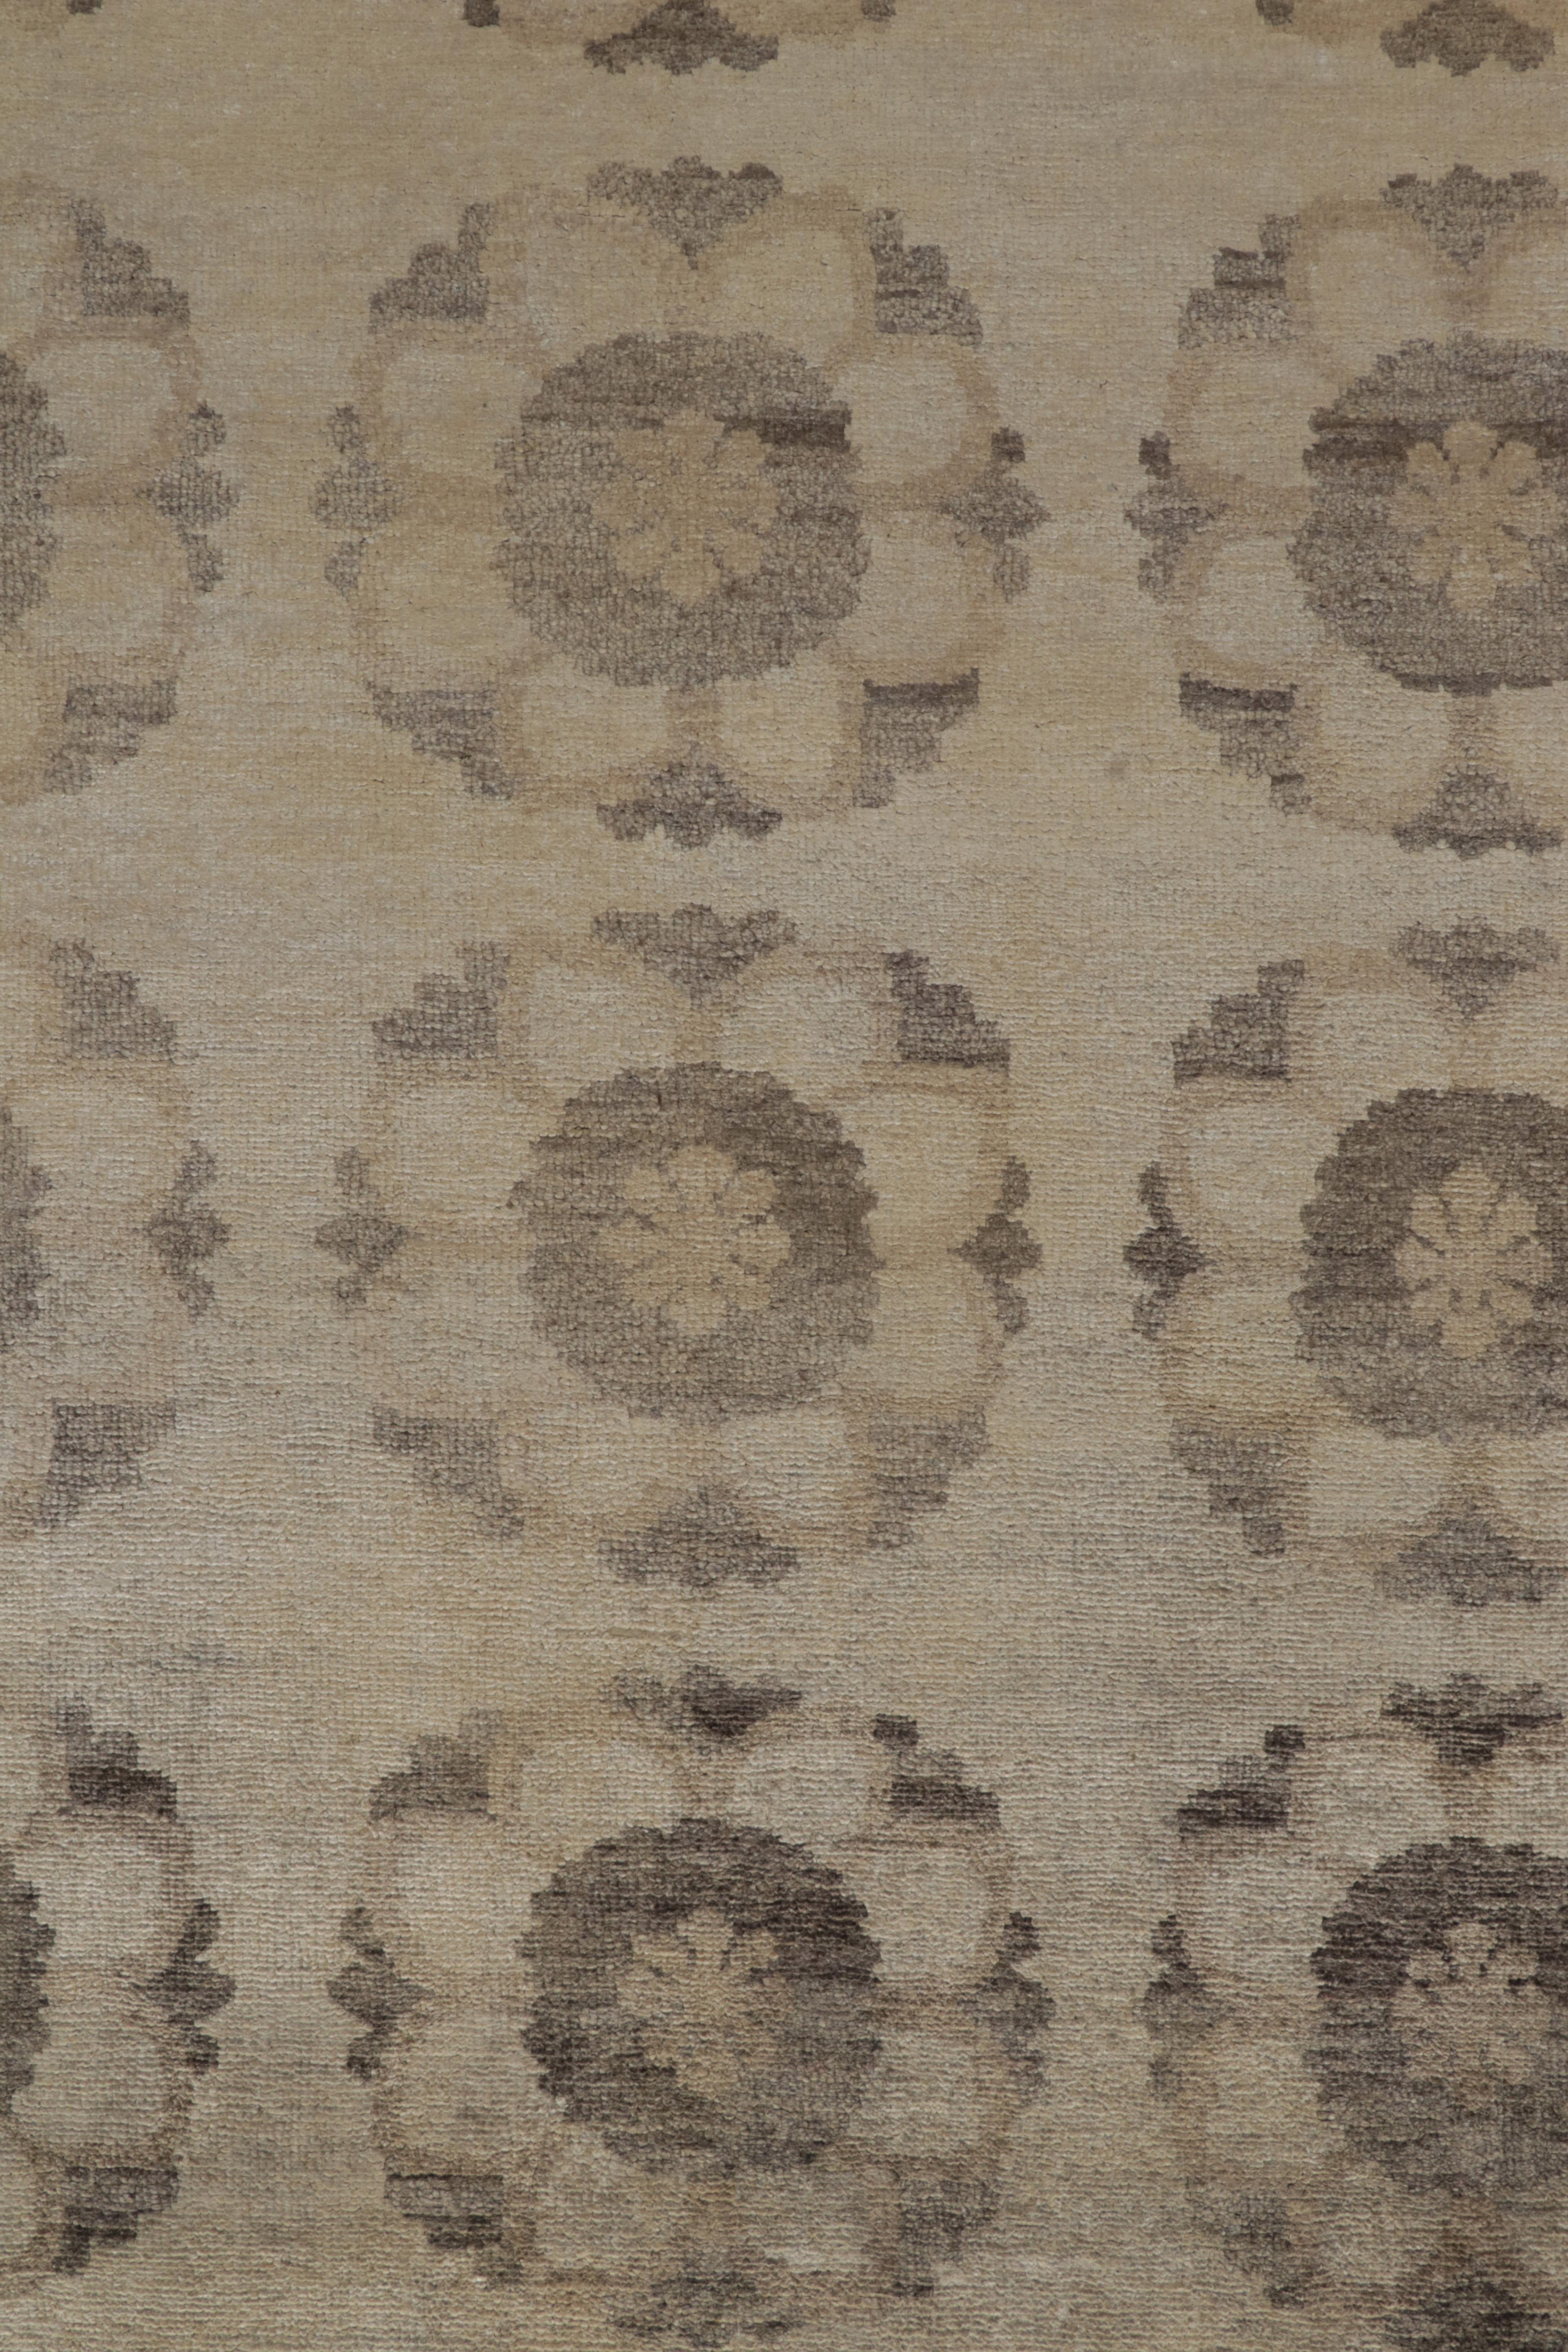 Hand-Knotted Rug & Kilim’s Arts & Crafts style rug in Beige-Brown Medallion Patterns For Sale